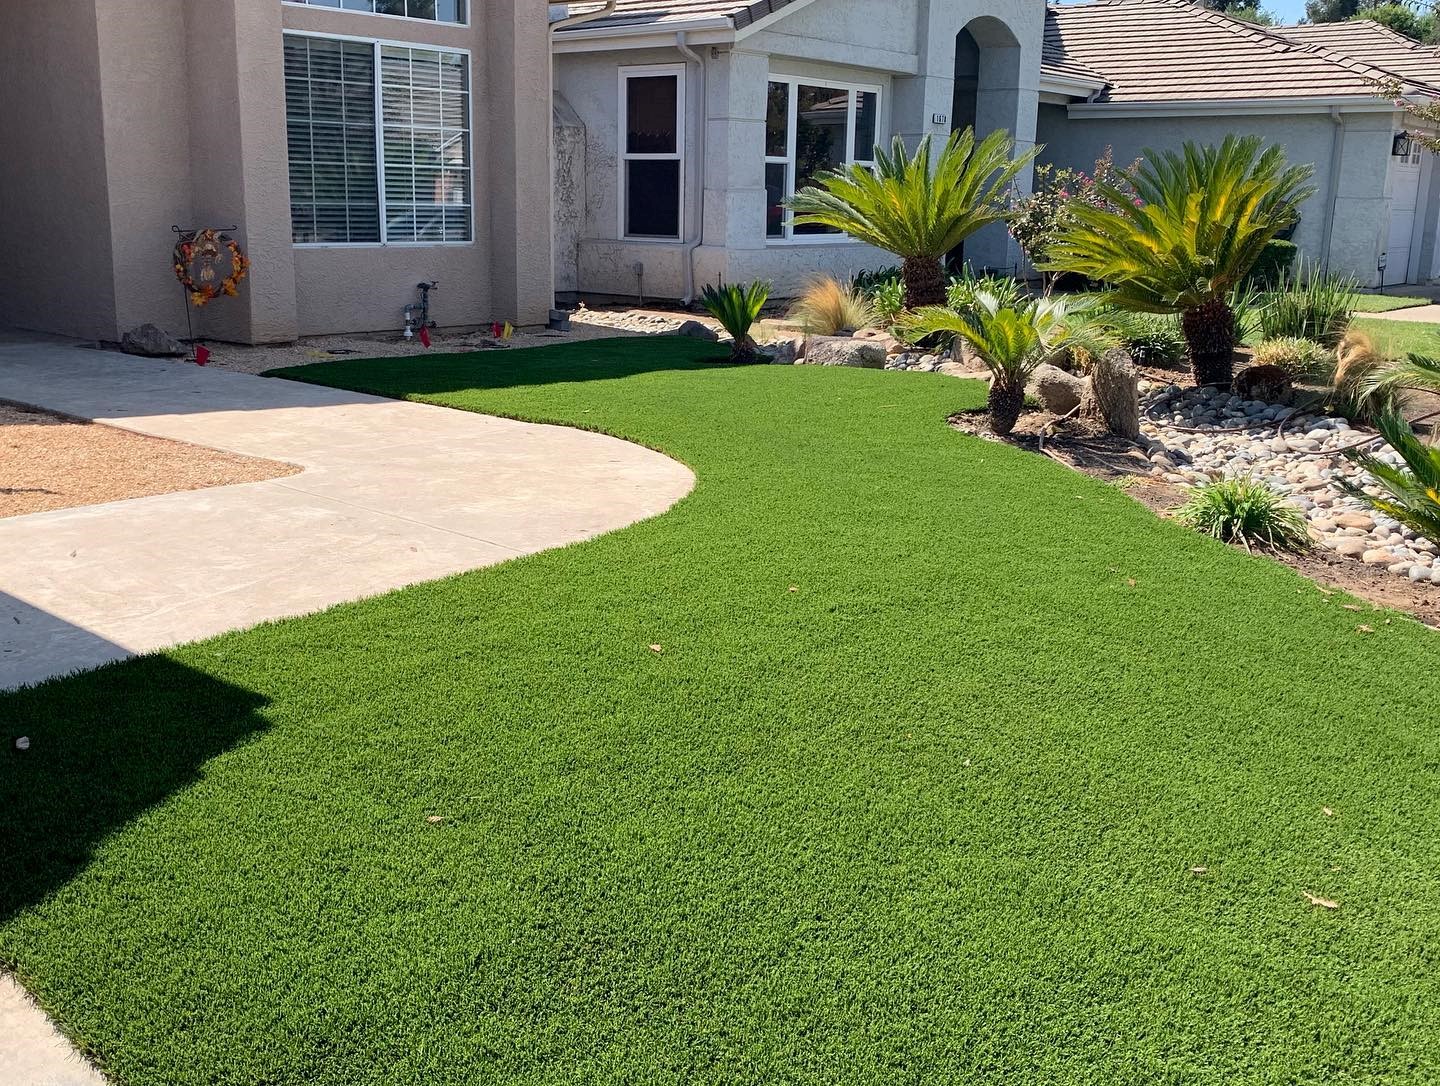 Make Installing Synthetic Grass A 2020 Resolution SYNLawn Central California